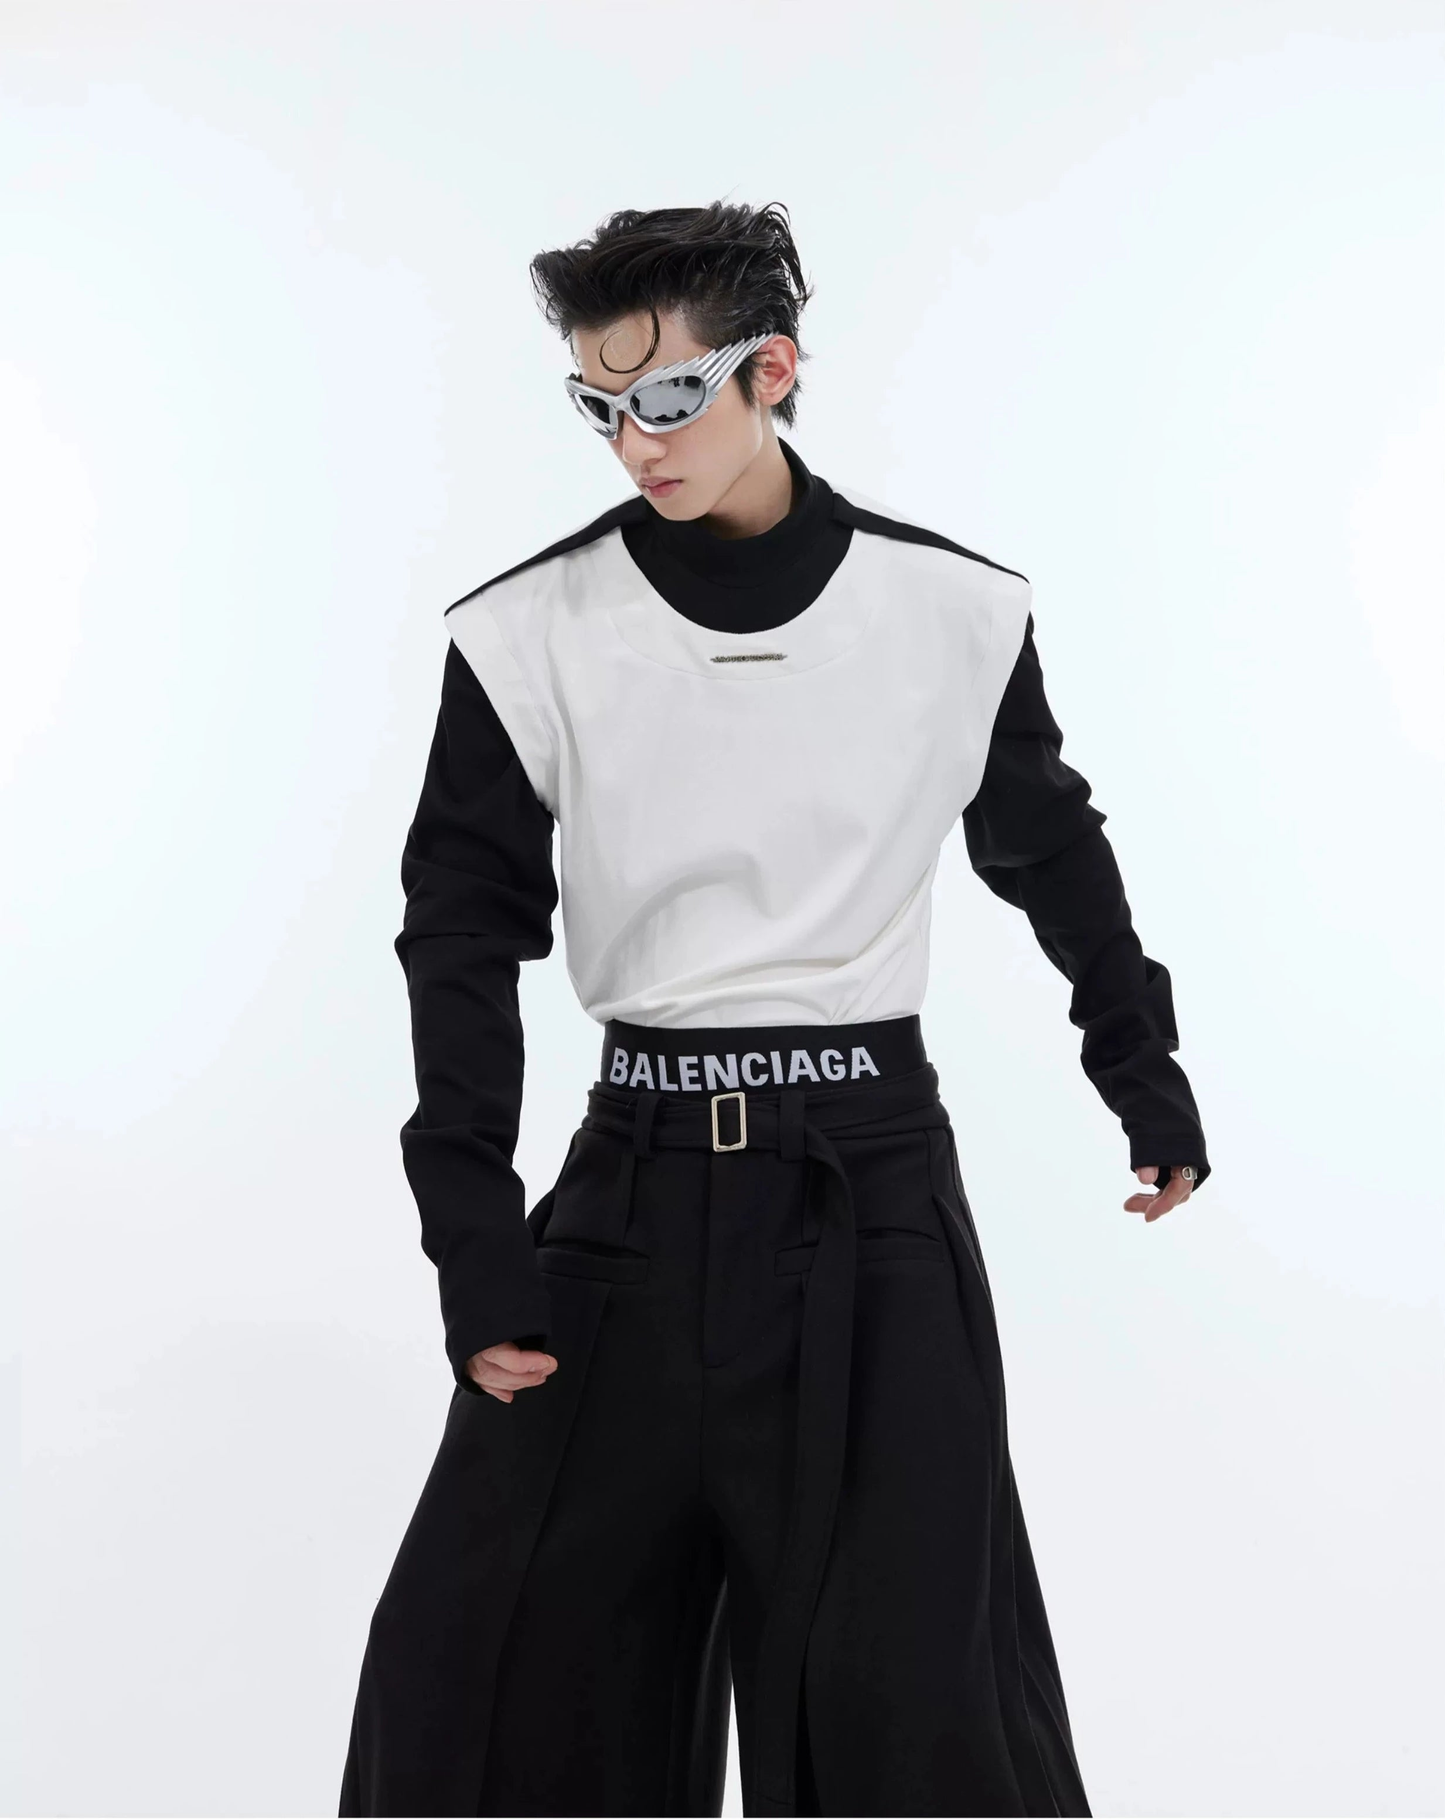 Contrasting Color Fake Layered Design Long Sleeve T-Shirt WN4031